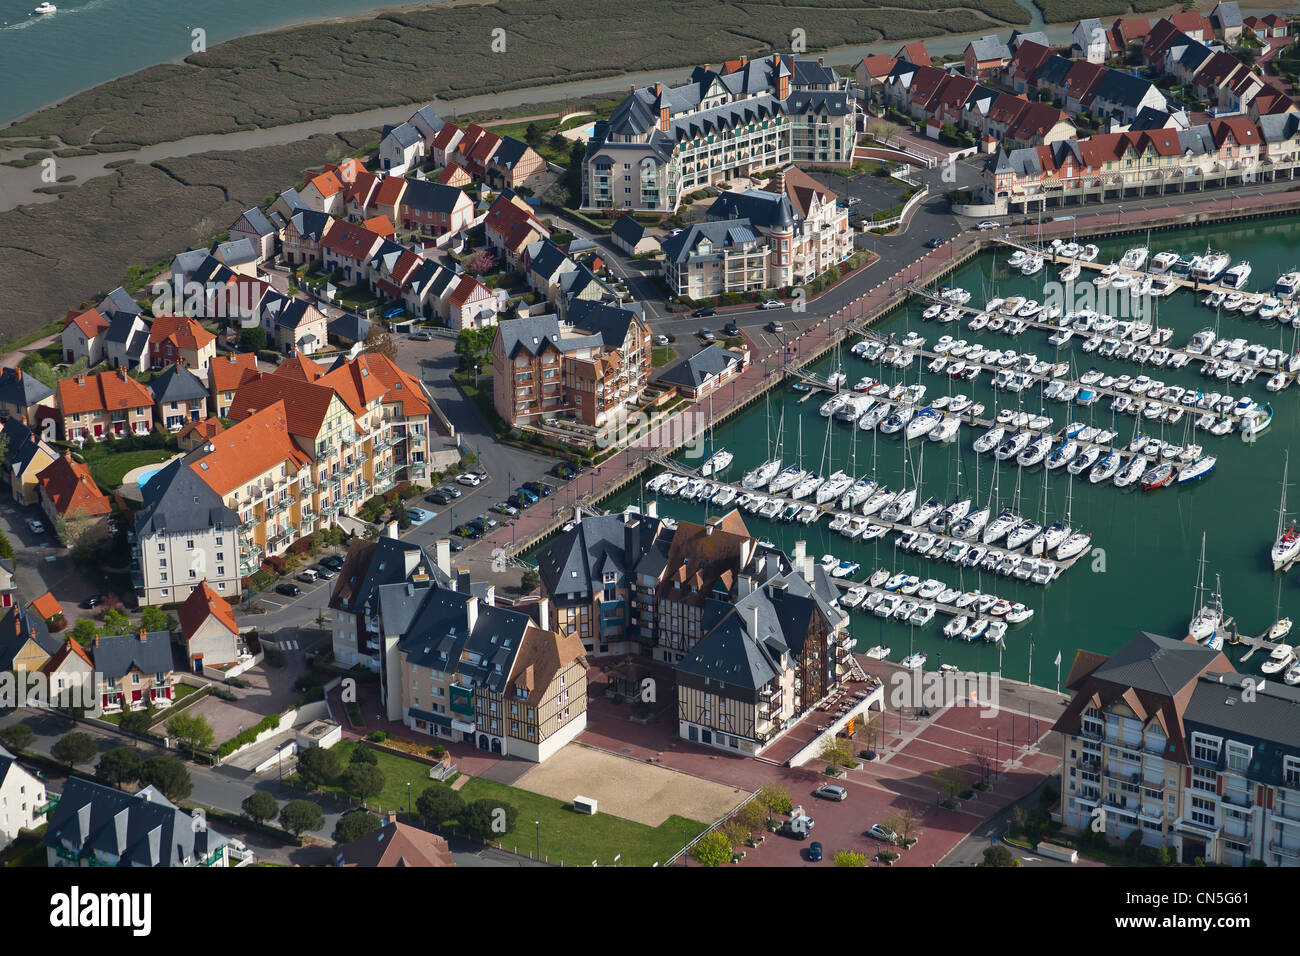 France, Calvados, Dives sur Mer, mouth of the Orne river, Port Guillaume  (aerial view Stock Photo - Alamy